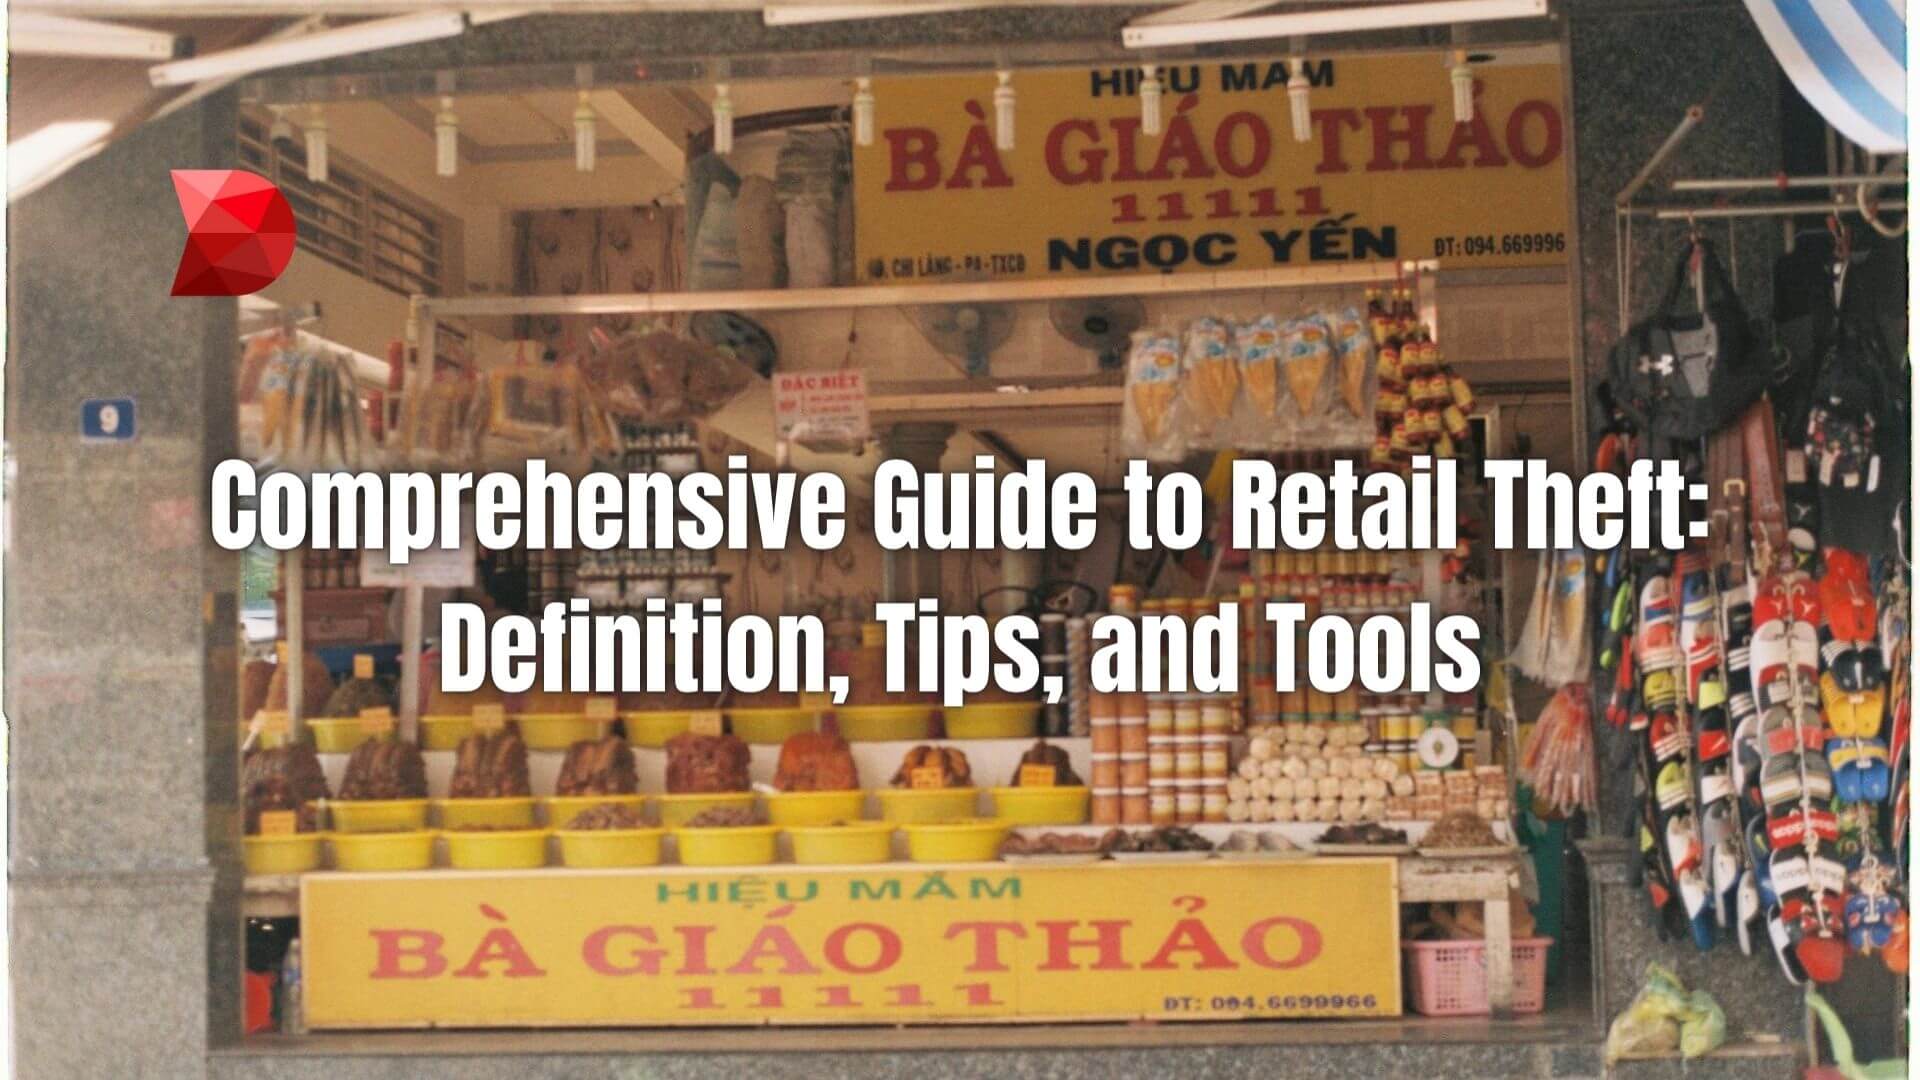 Unlock the secrets of retail store theft with our guide. Learn its definition, valuable tips, and essential tools to protect your business.